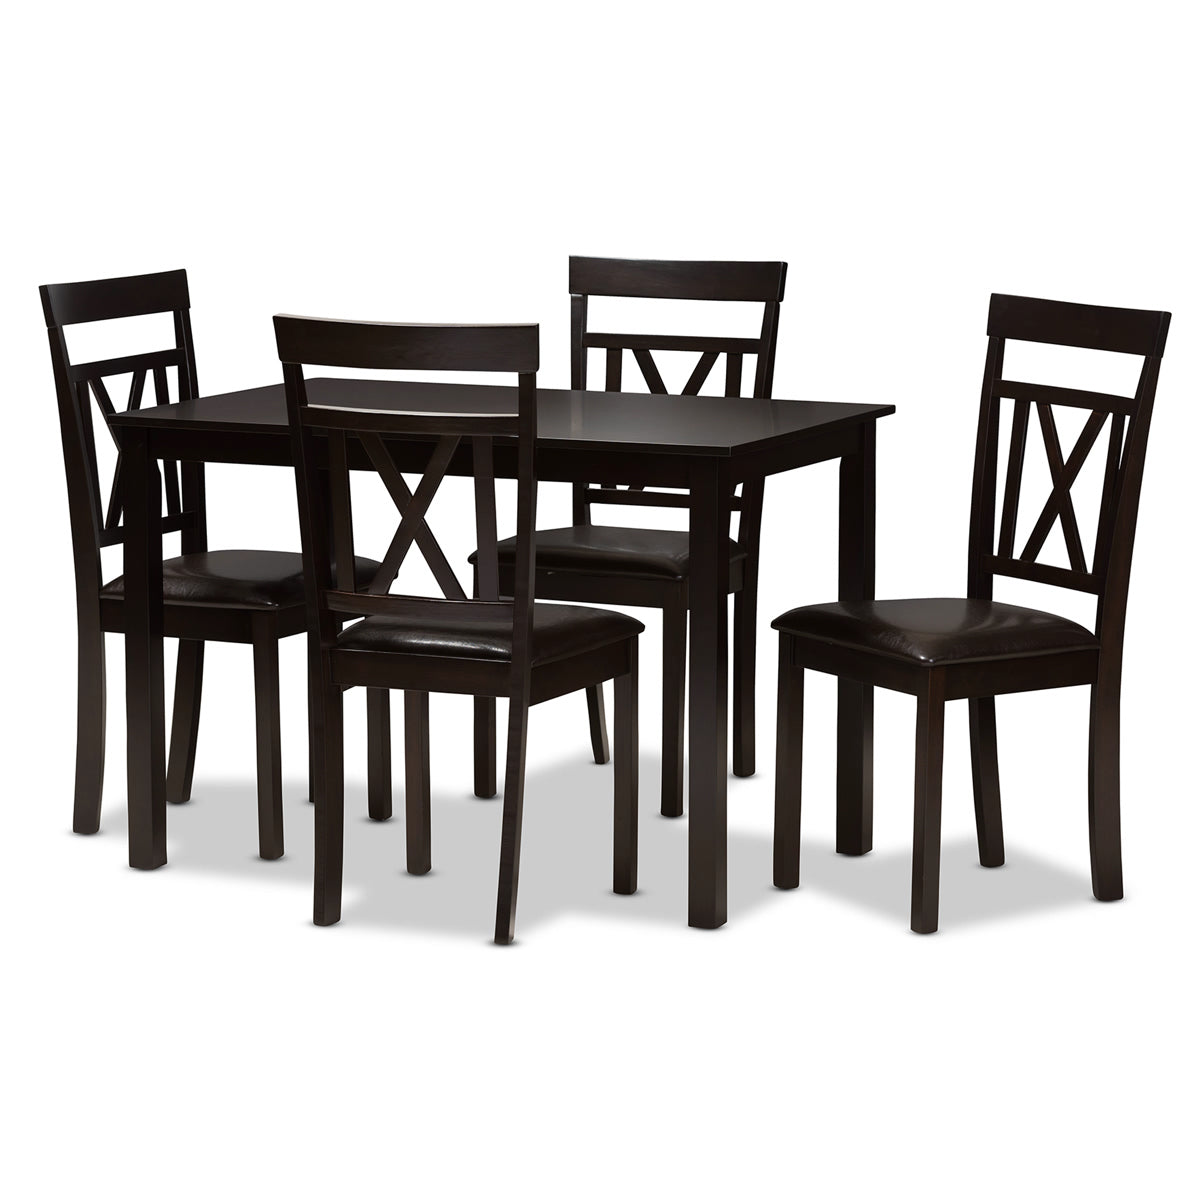 Baxton Studio Rosie Modern and Contemporary Dark Brown Faux Leather Upholstered 5-Piece Dining Set Baxton Studio-0-Minimal And Modern - 1